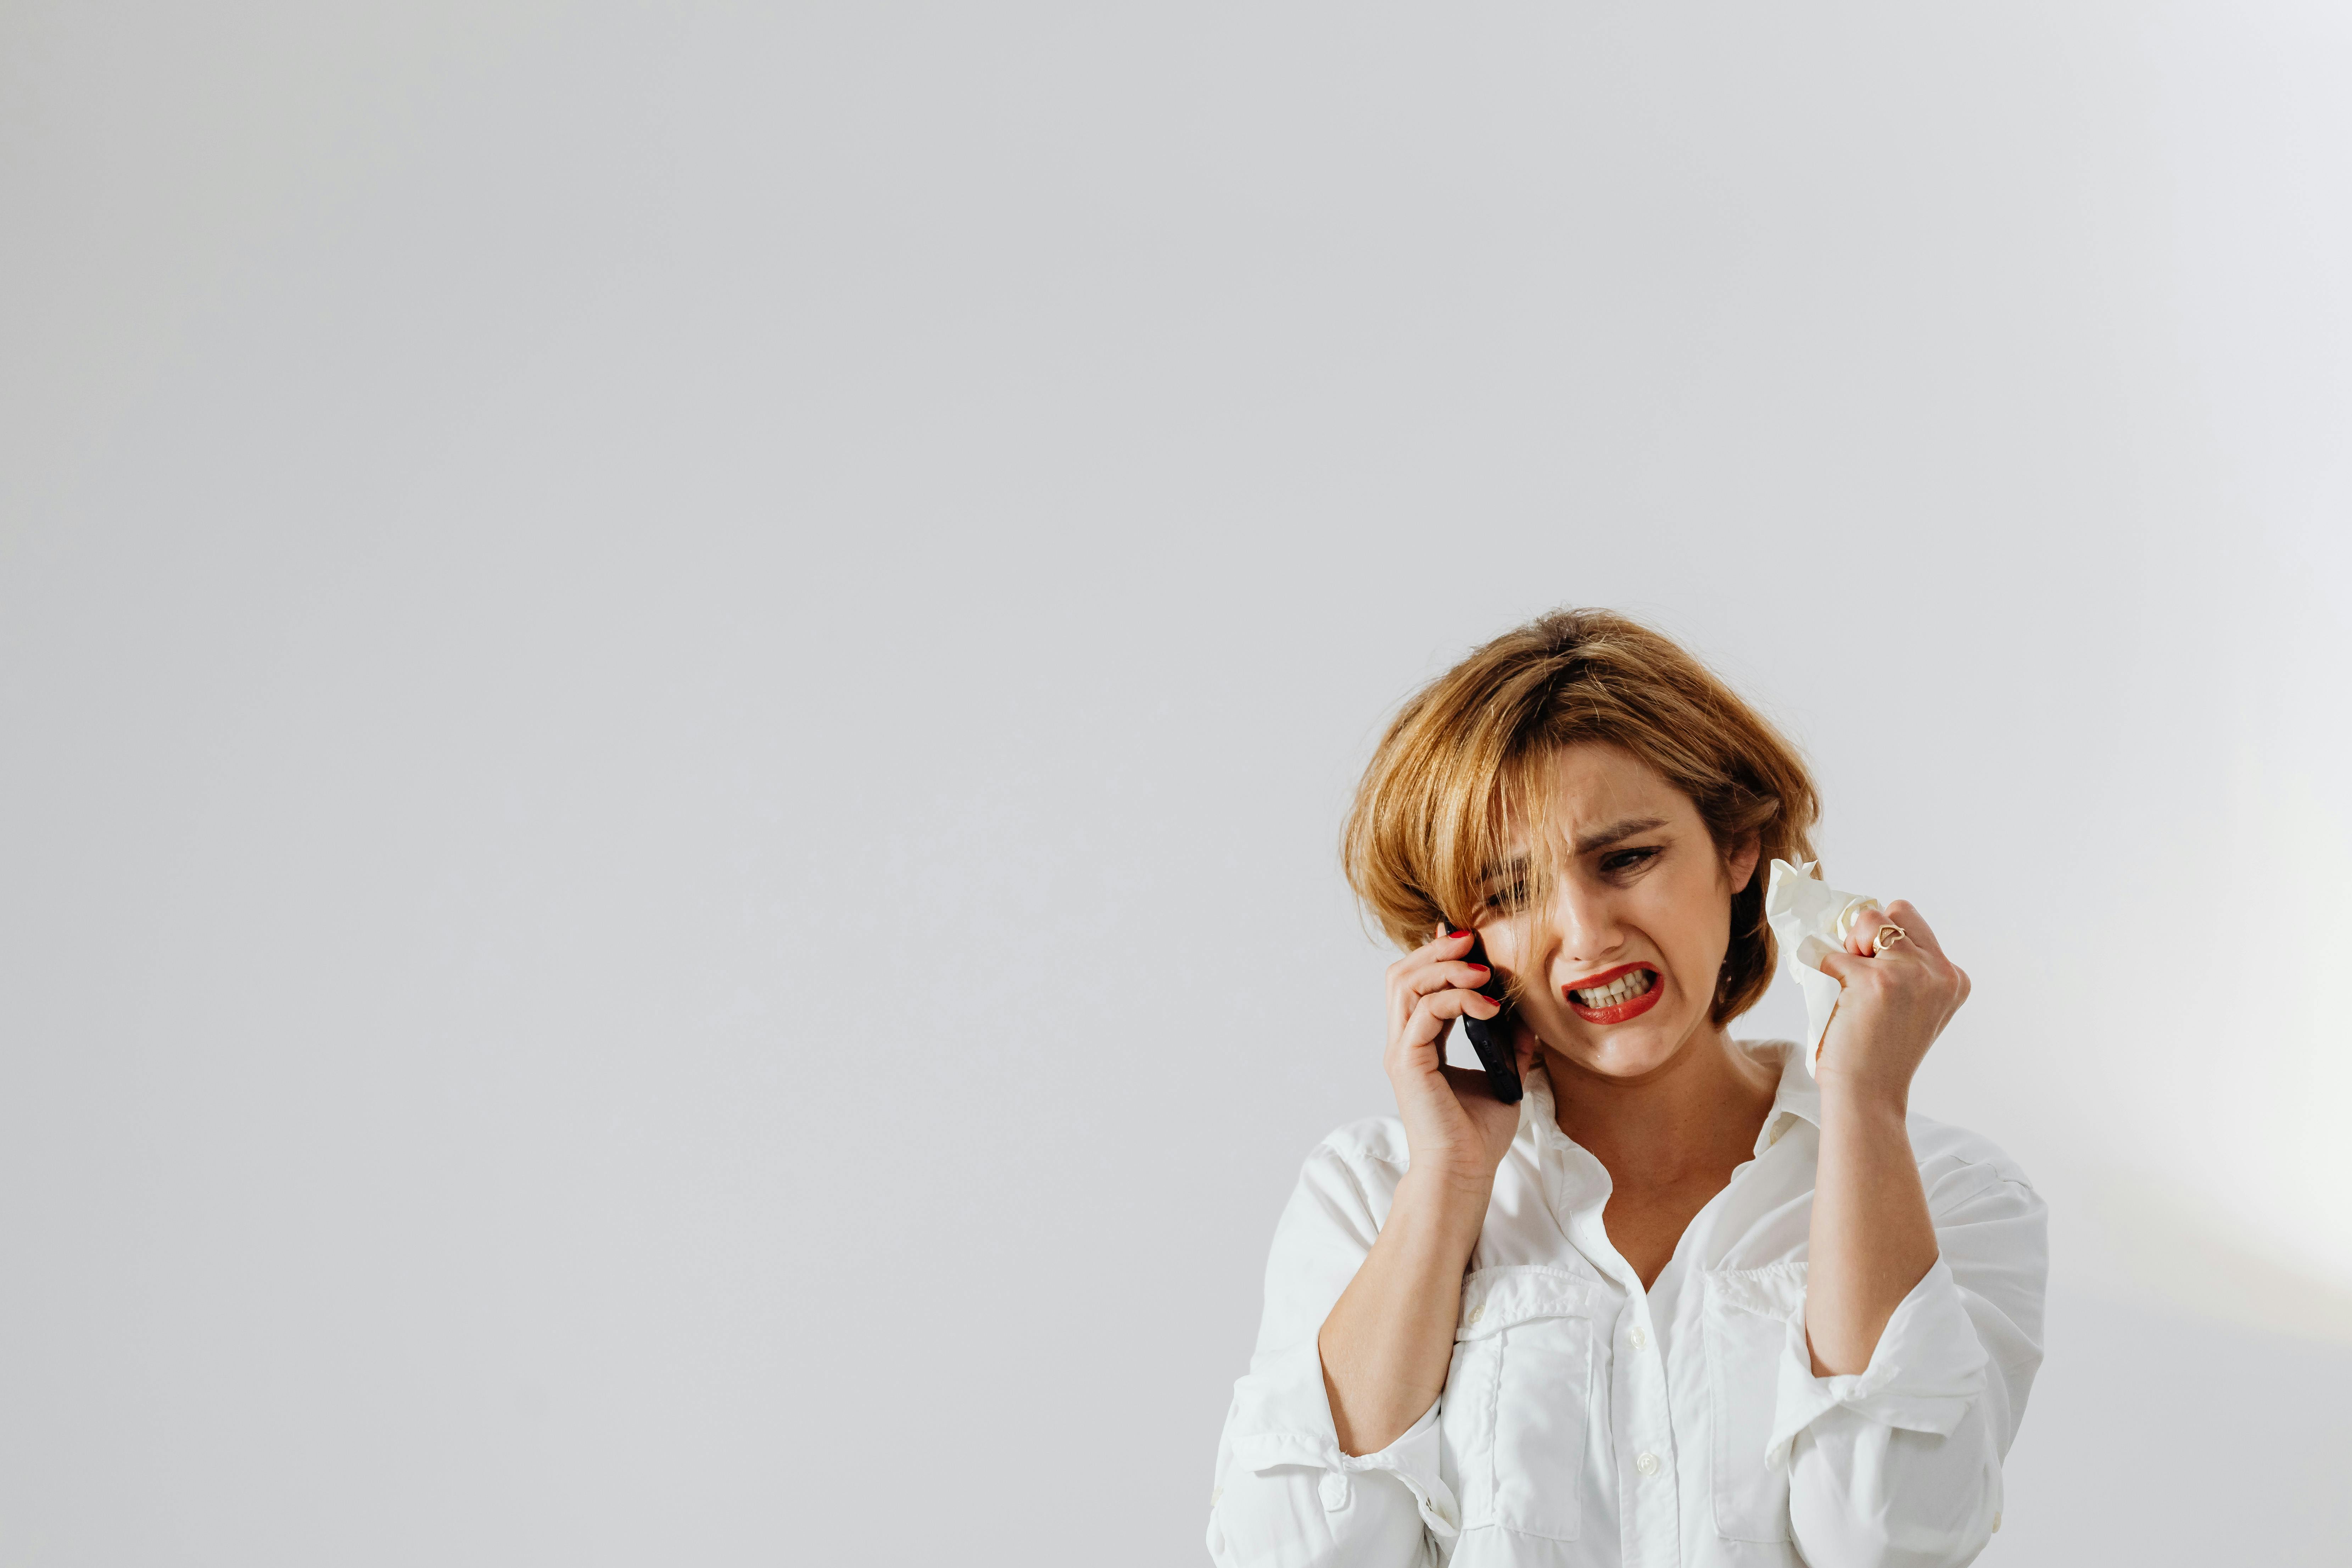 An angry woman on phone | Source: Pexels